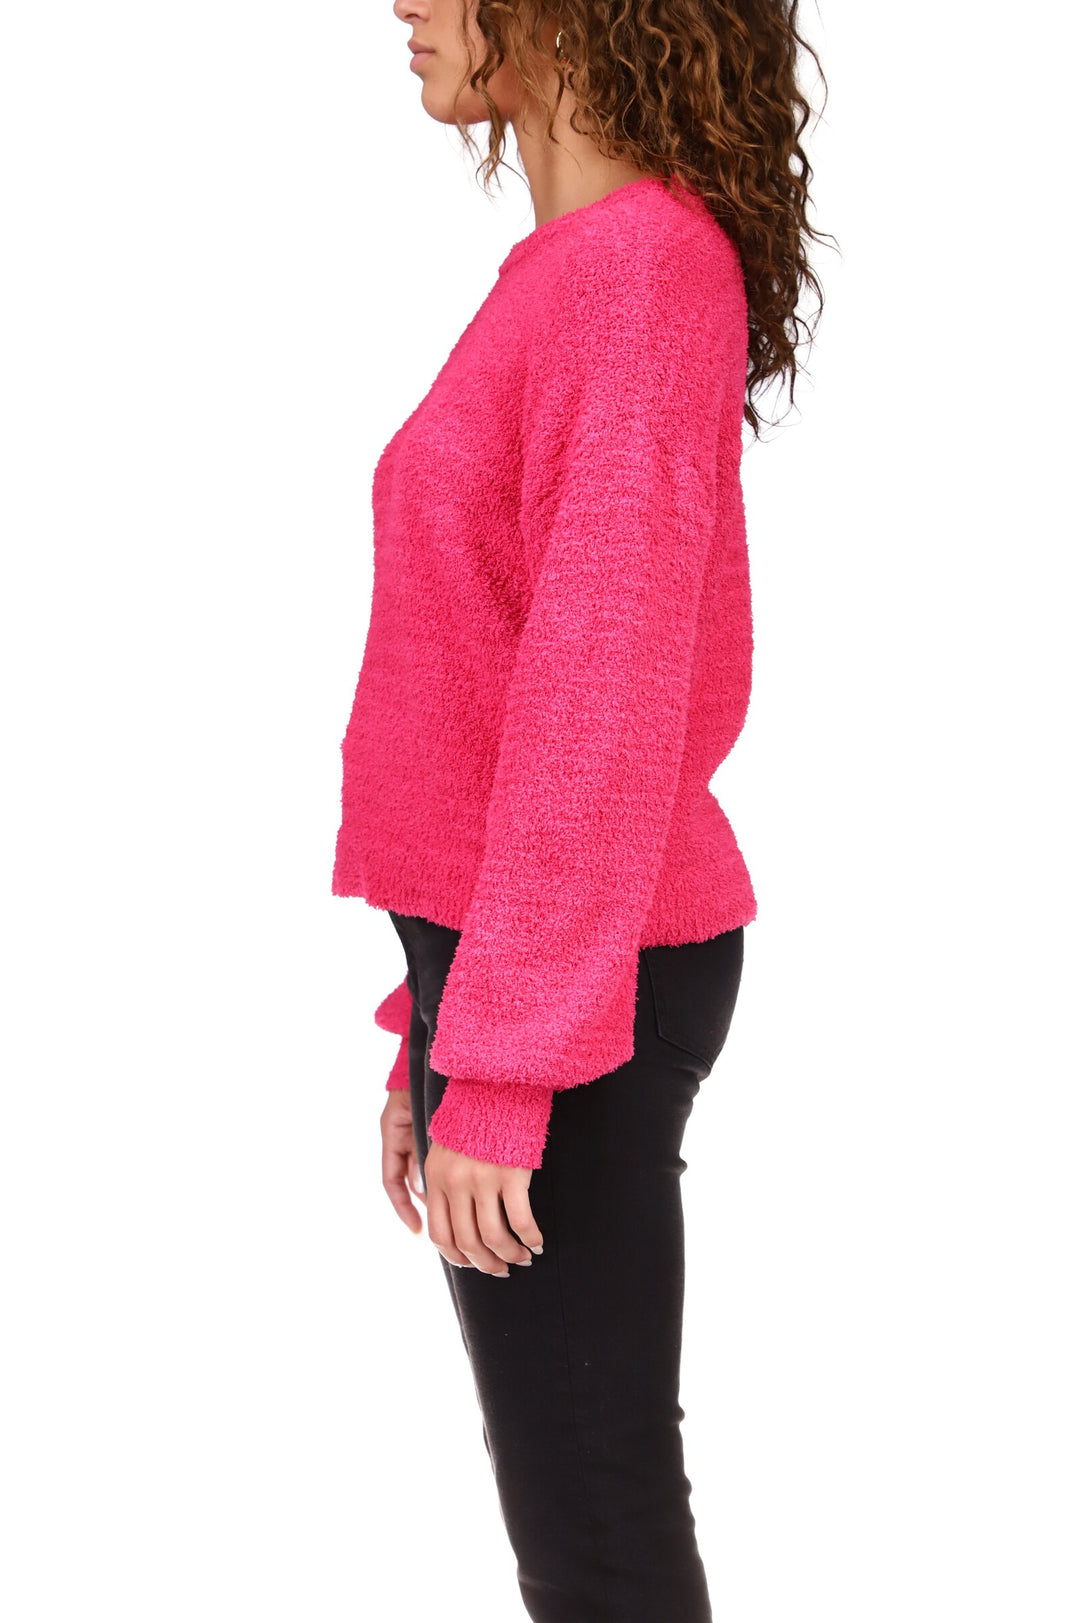 PLUSH VOLUME SLEEVE SWEATER - POWER PINK - Kingfisher Road - Online Boutique